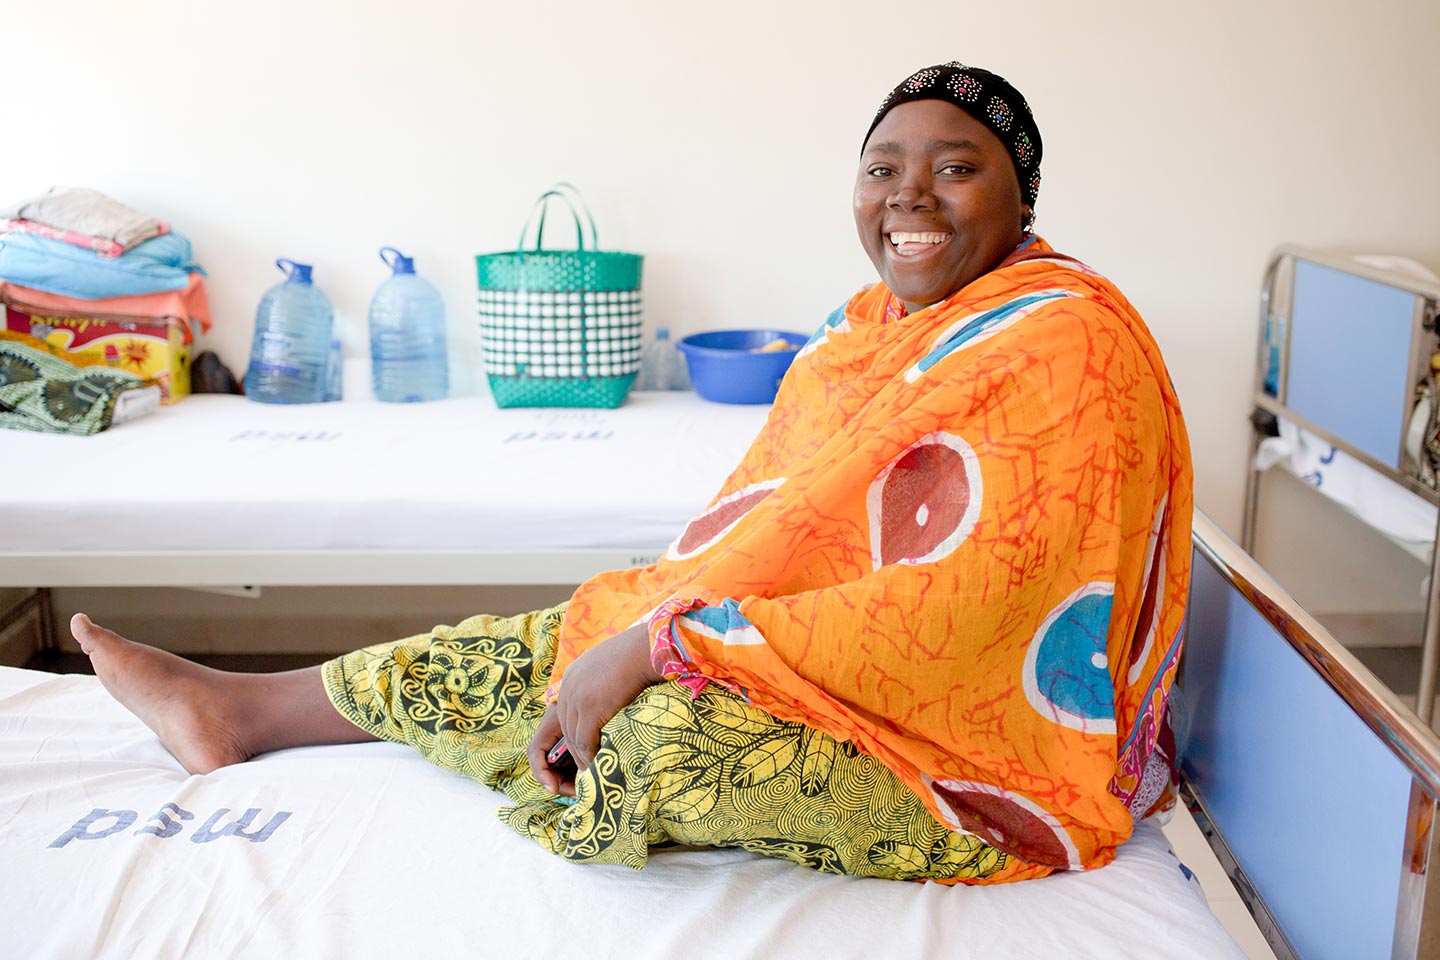 Cervical cancer patient Mwashamba Rajabu poses with her head scarf to cover her hair loss at the Ocean Road Cancer Institute in Dar es Salaam. – Credit: Gavi/2014/Karel Prinsloo